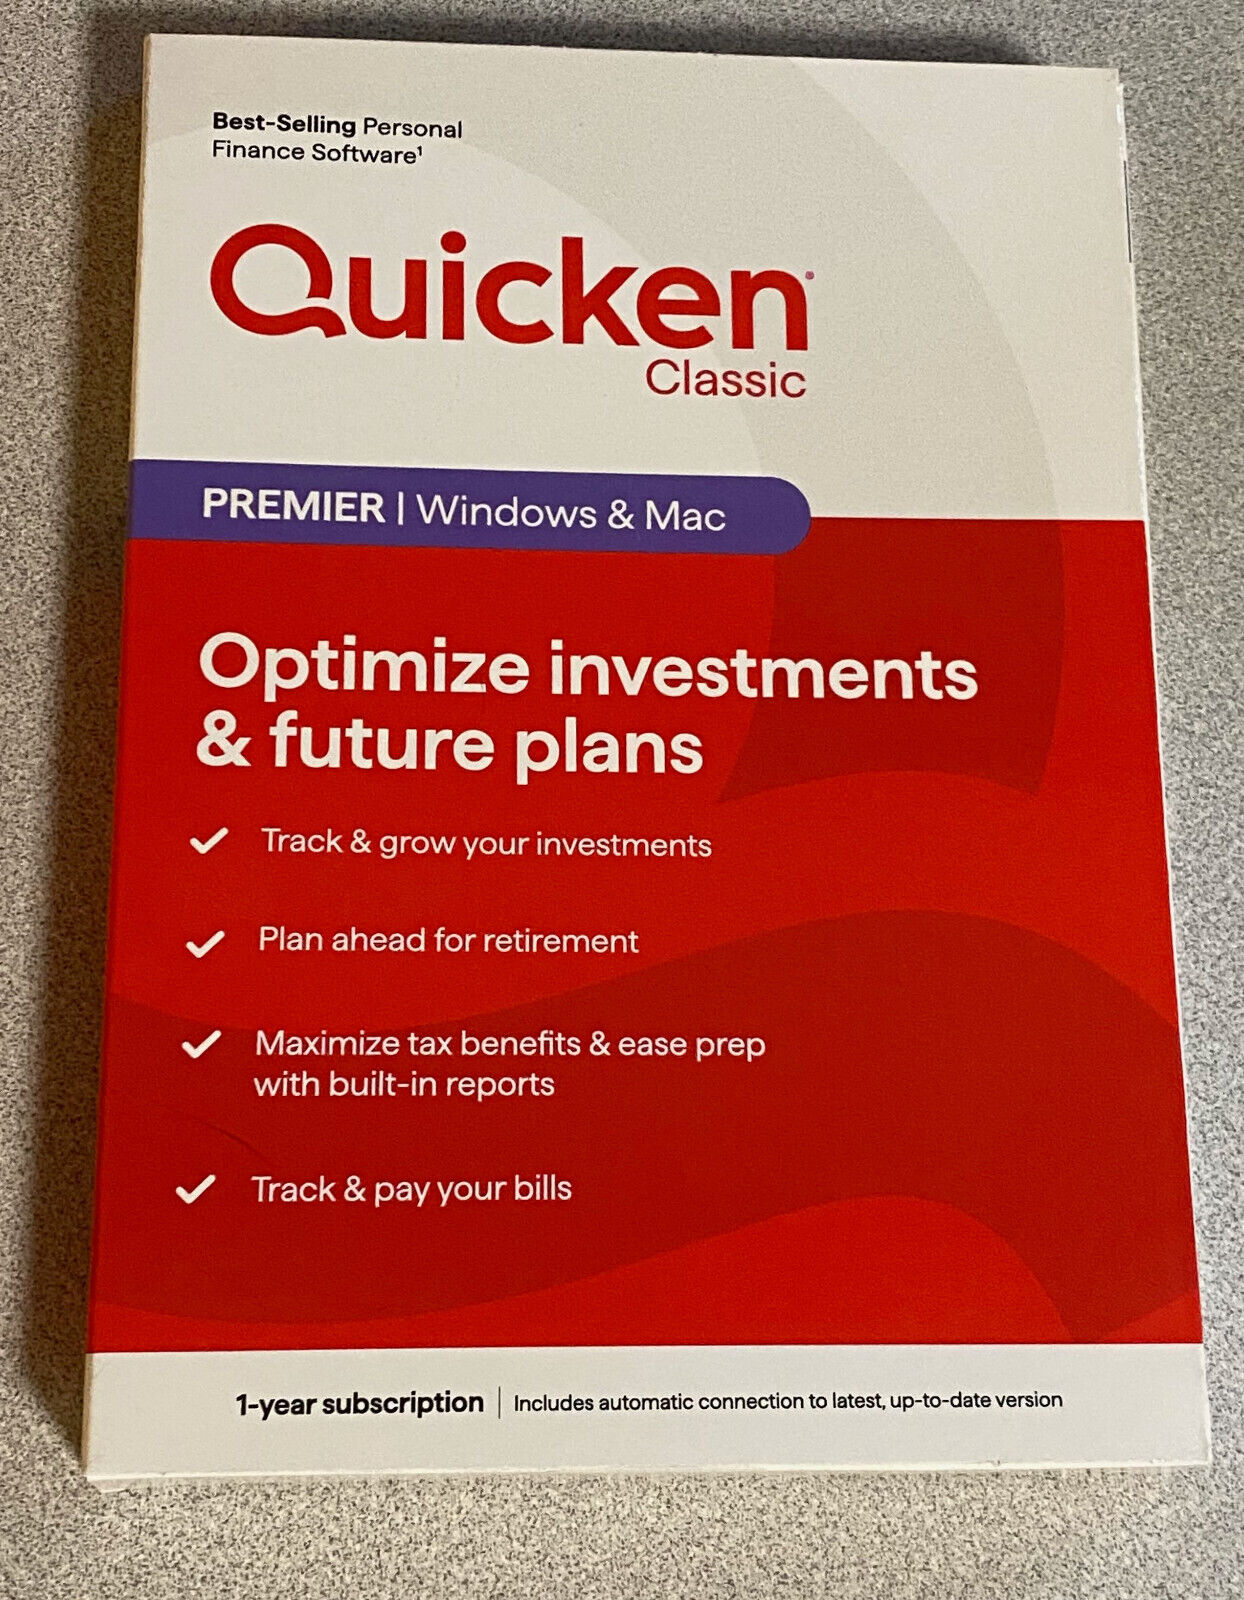 Quicken Classic Premier 1 Year Subscription Key Card New 170458 841798102190